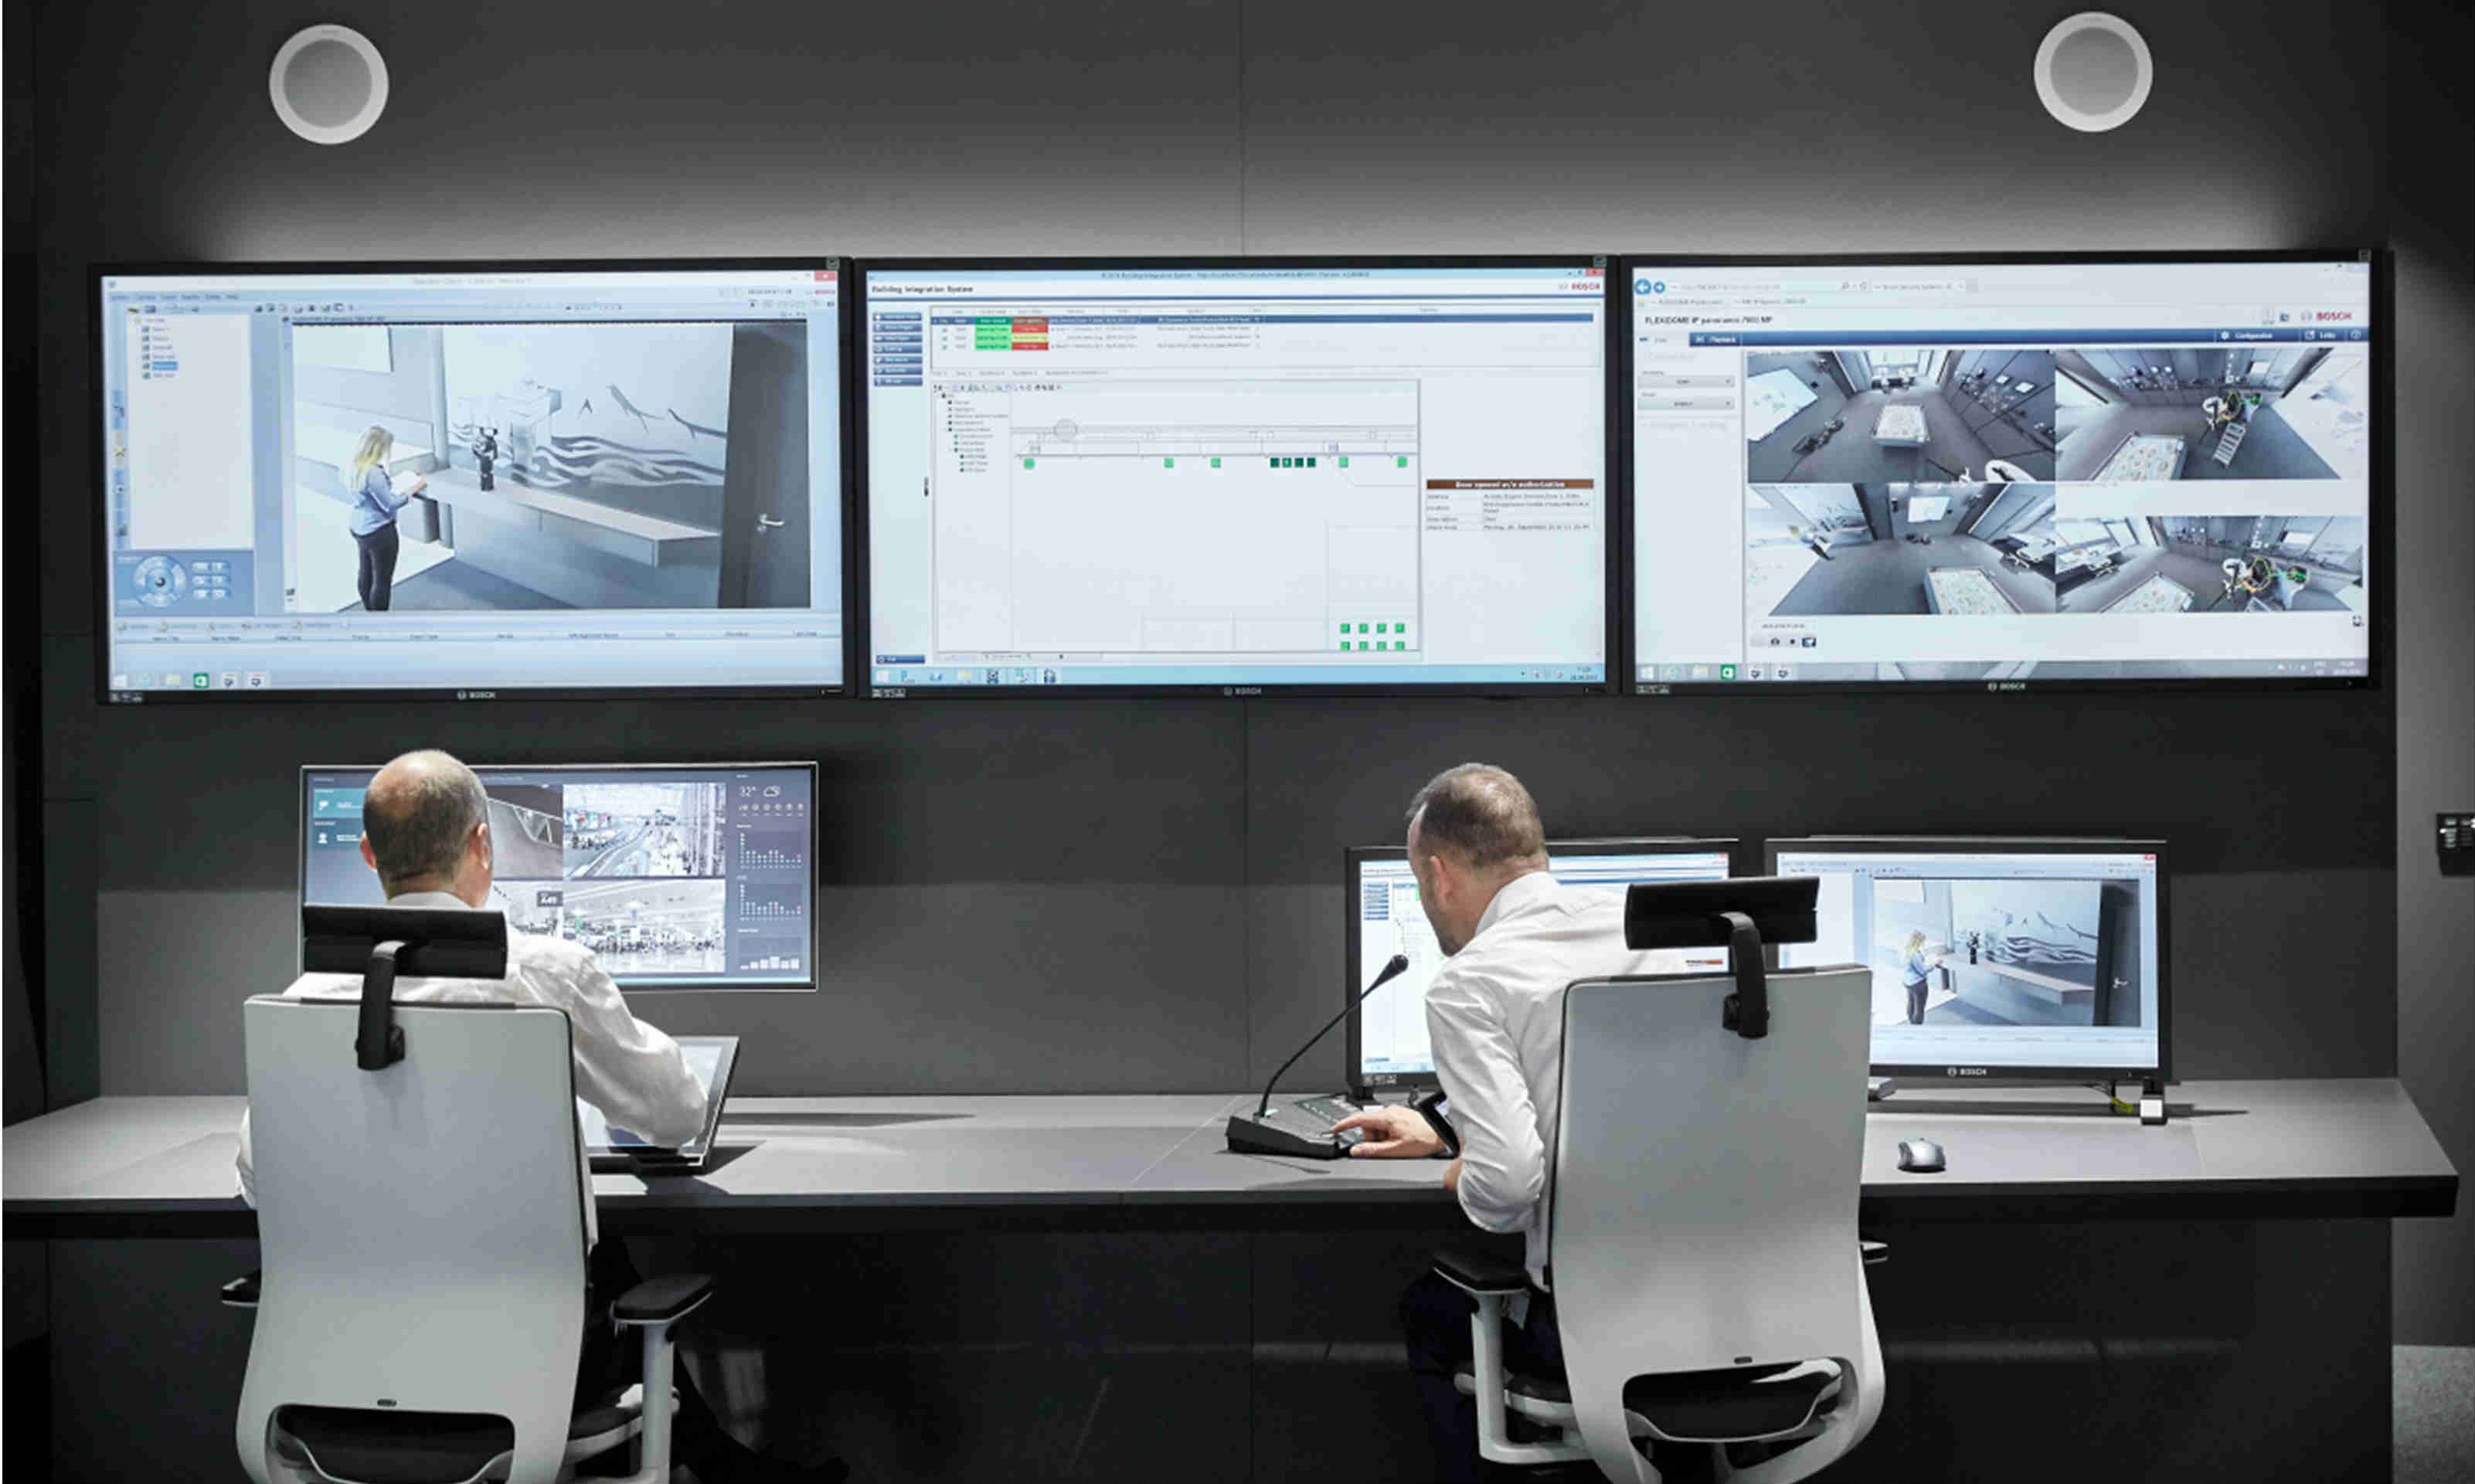 Bosch launches Video Management System 7.5, further enhancing forensic capabilities and openness in video surveillance